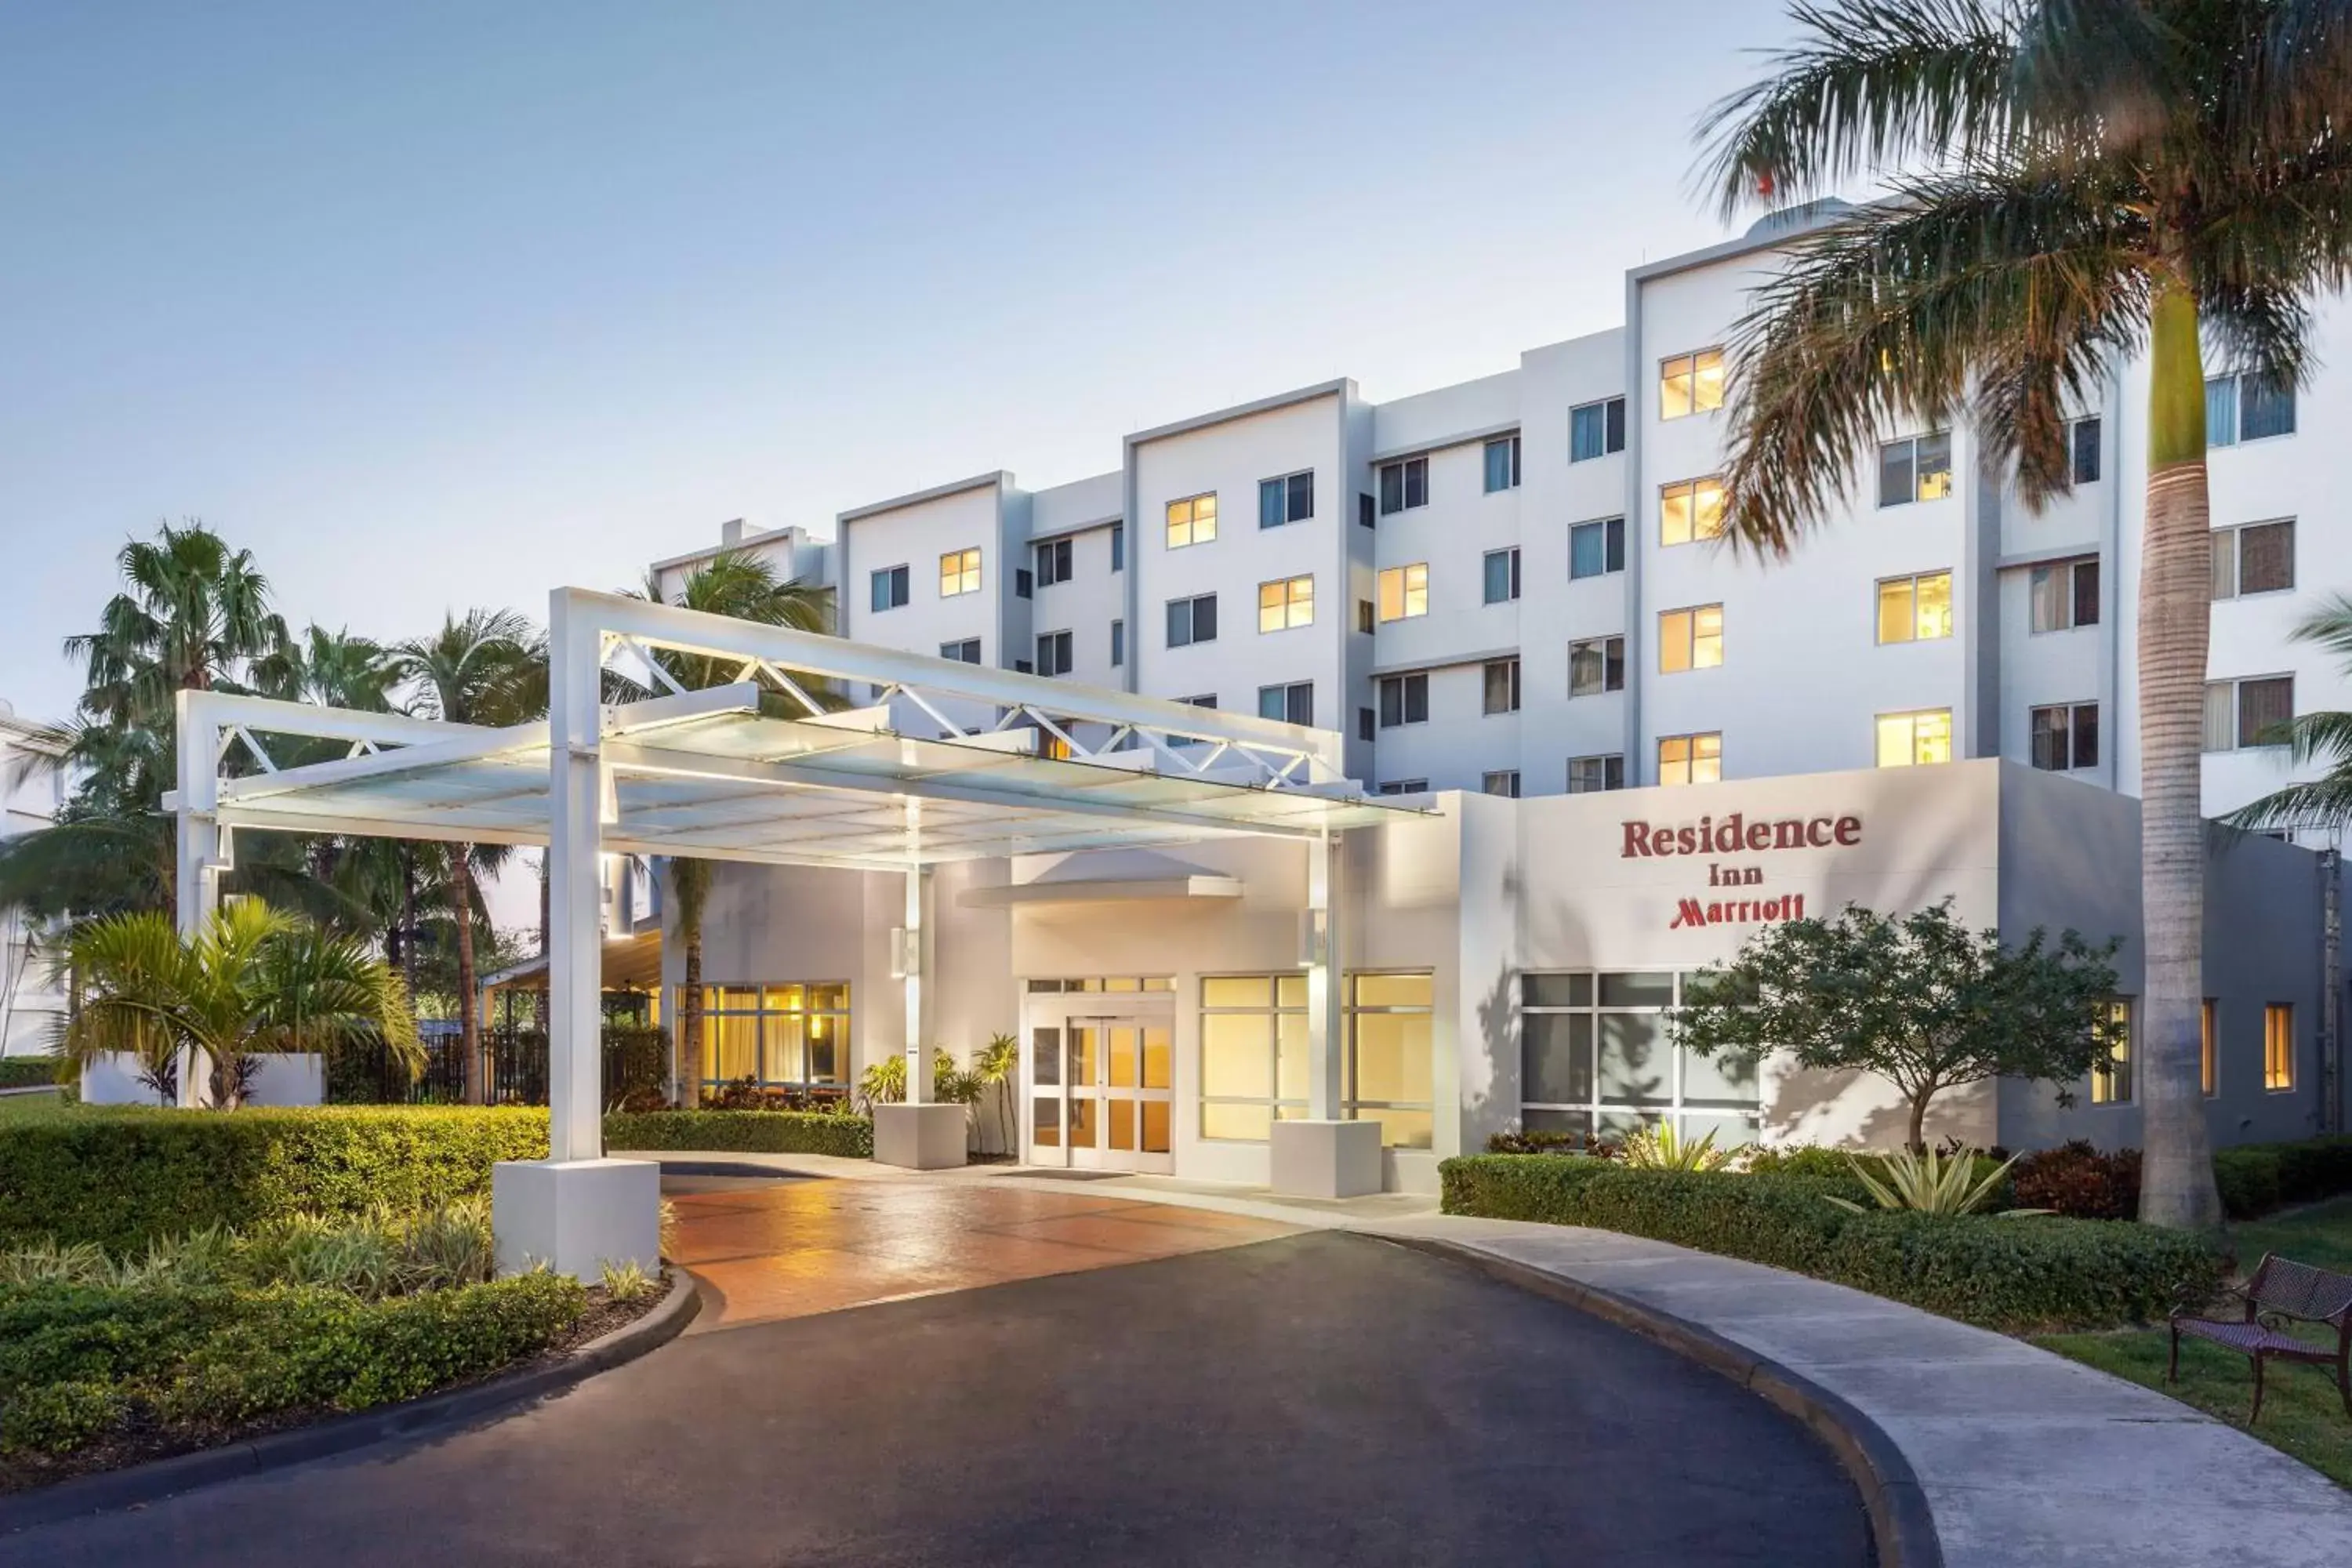 Property building, Swimming Pool in Residence Inn by Marriott Miami Airport